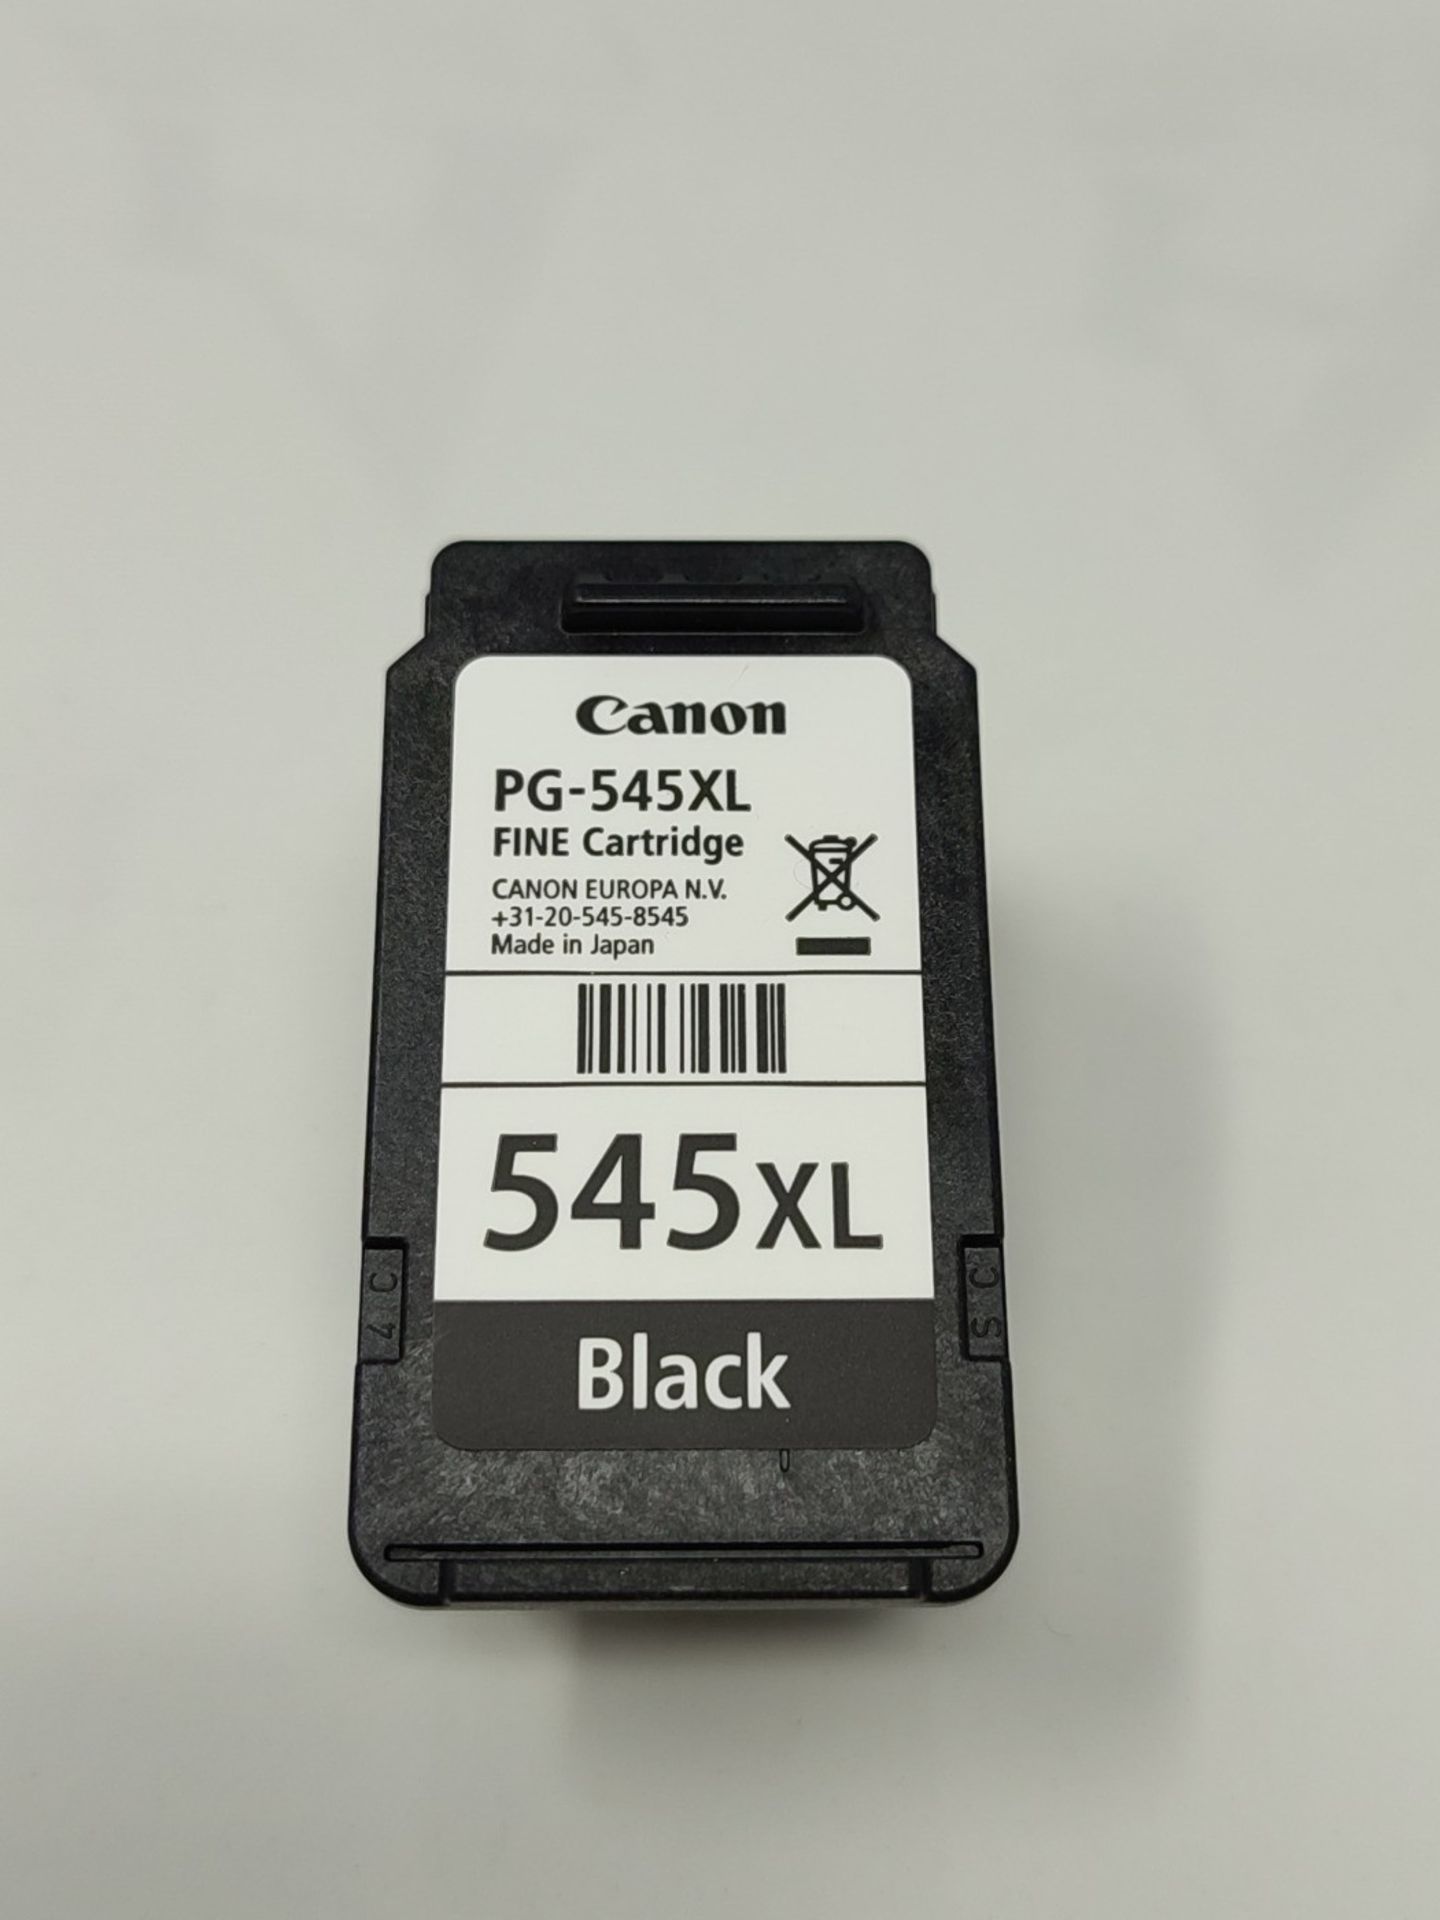 Canon Genuine Printer Ink - 1 x PG-545XL High Capacity 15ML Black Ink Cartridge for up - Image 3 of 3